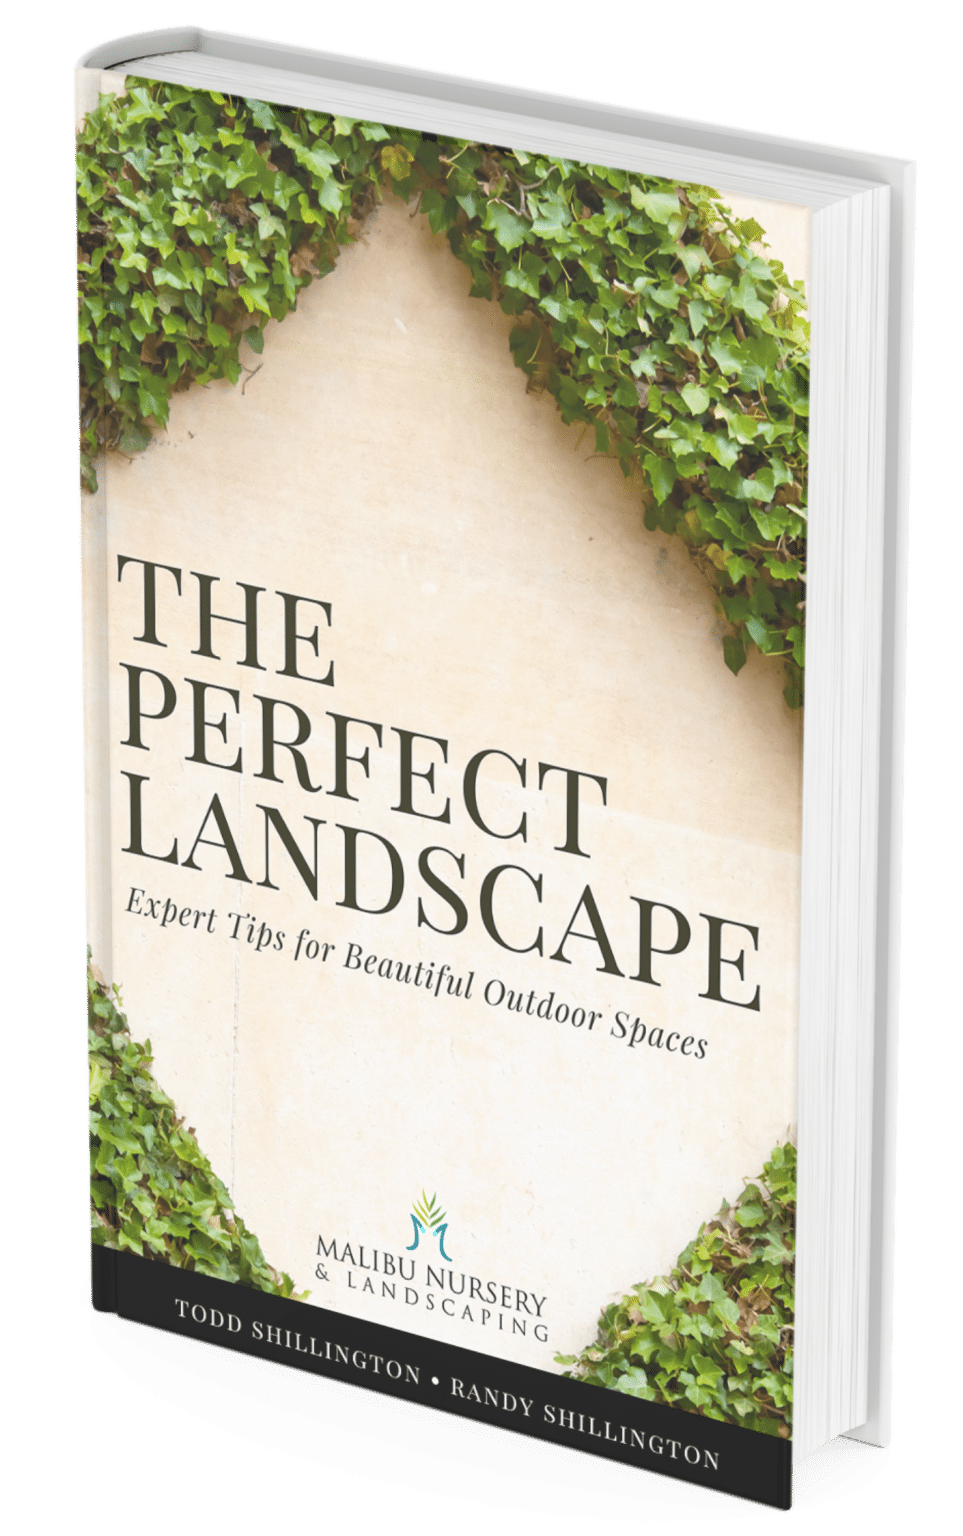 The Perfect Landscape Book by Malibu Nursery & Landscaping